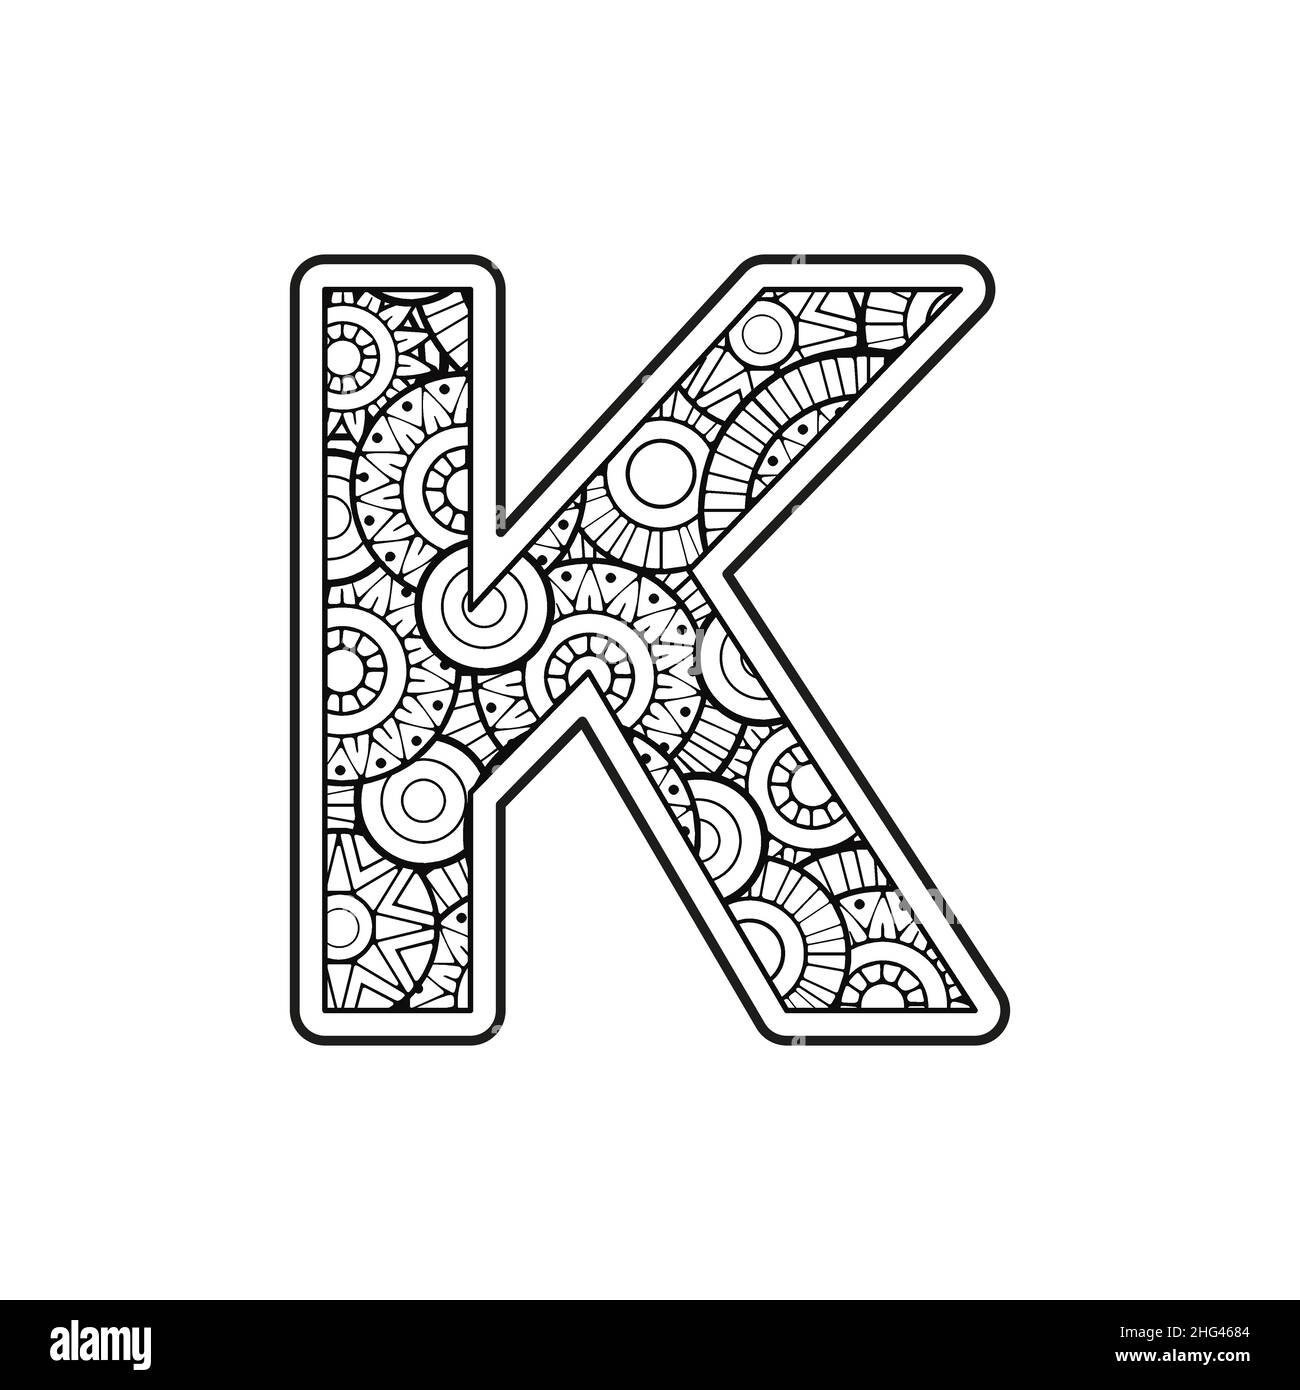 Coloring page for adult. Contour Capital English Letter K on a mandala ...